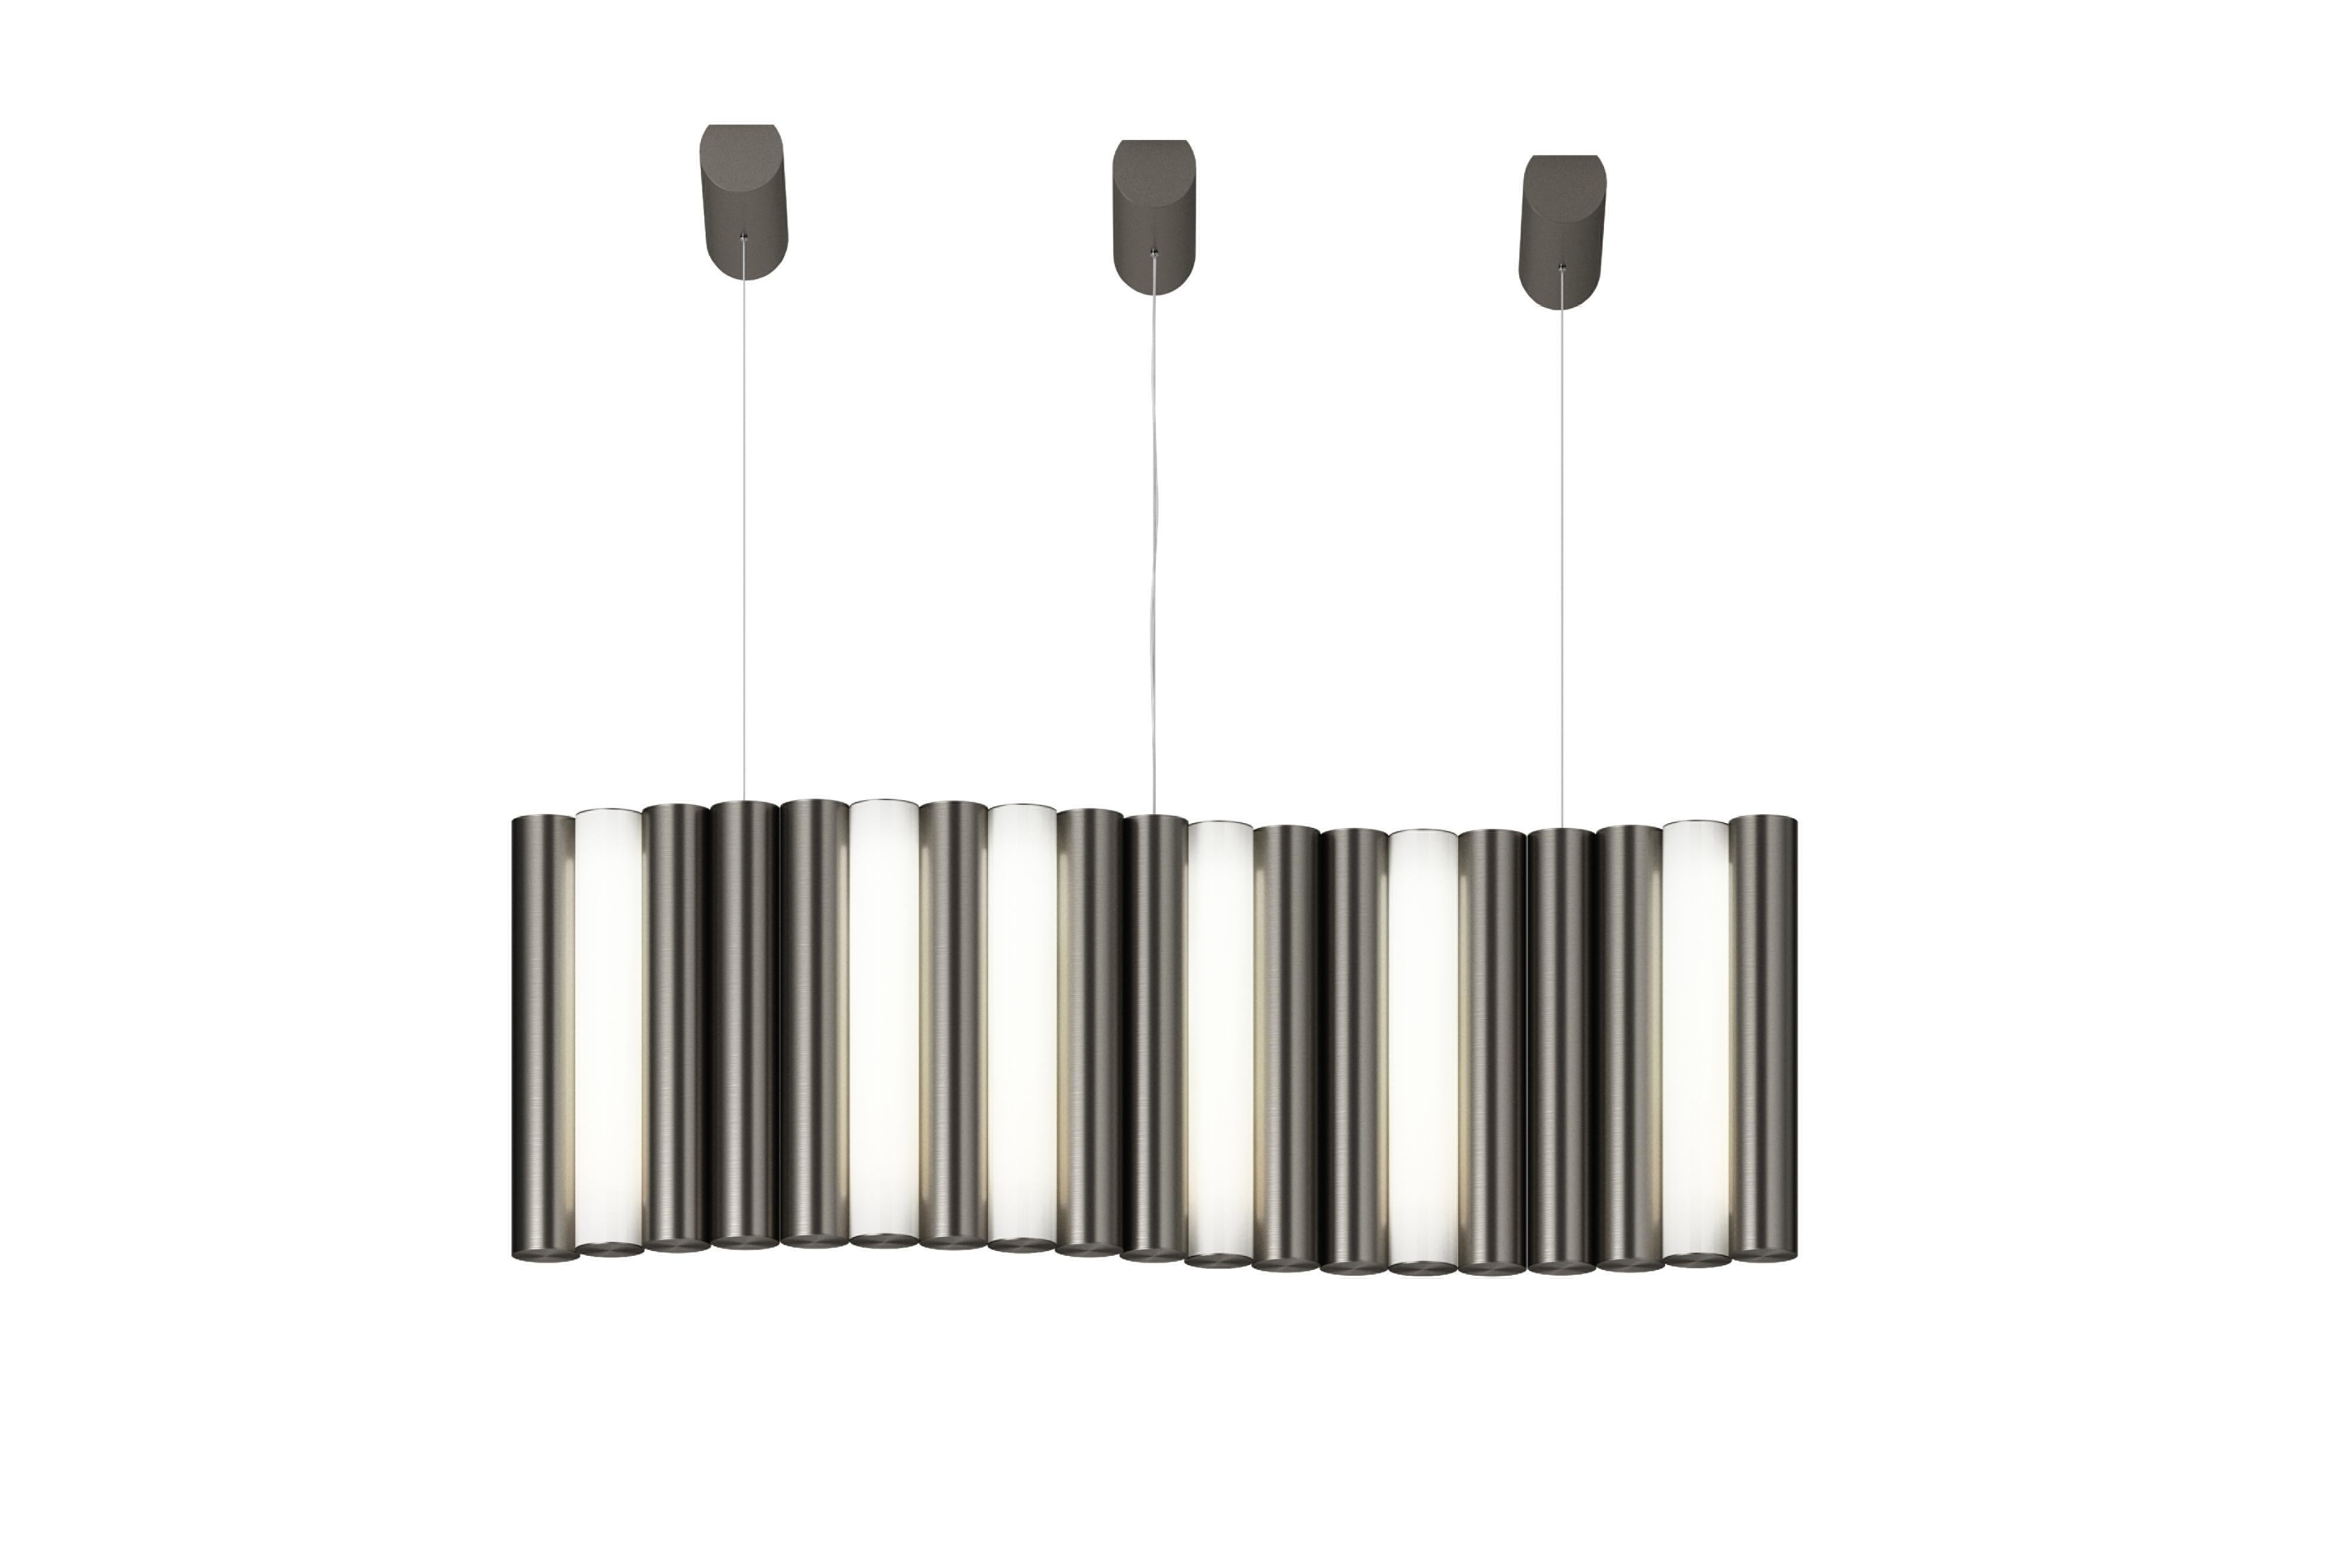 Gamma L19 graphite pendant by Sylvain Willenz
Dimensions: D96 x W41.5 X H36.3 cm
Materials: solid brass, white Polycarbonate diffuser, metal cable and transparent electric cable.
Others finishes and dimensions are available.

All our lamps can